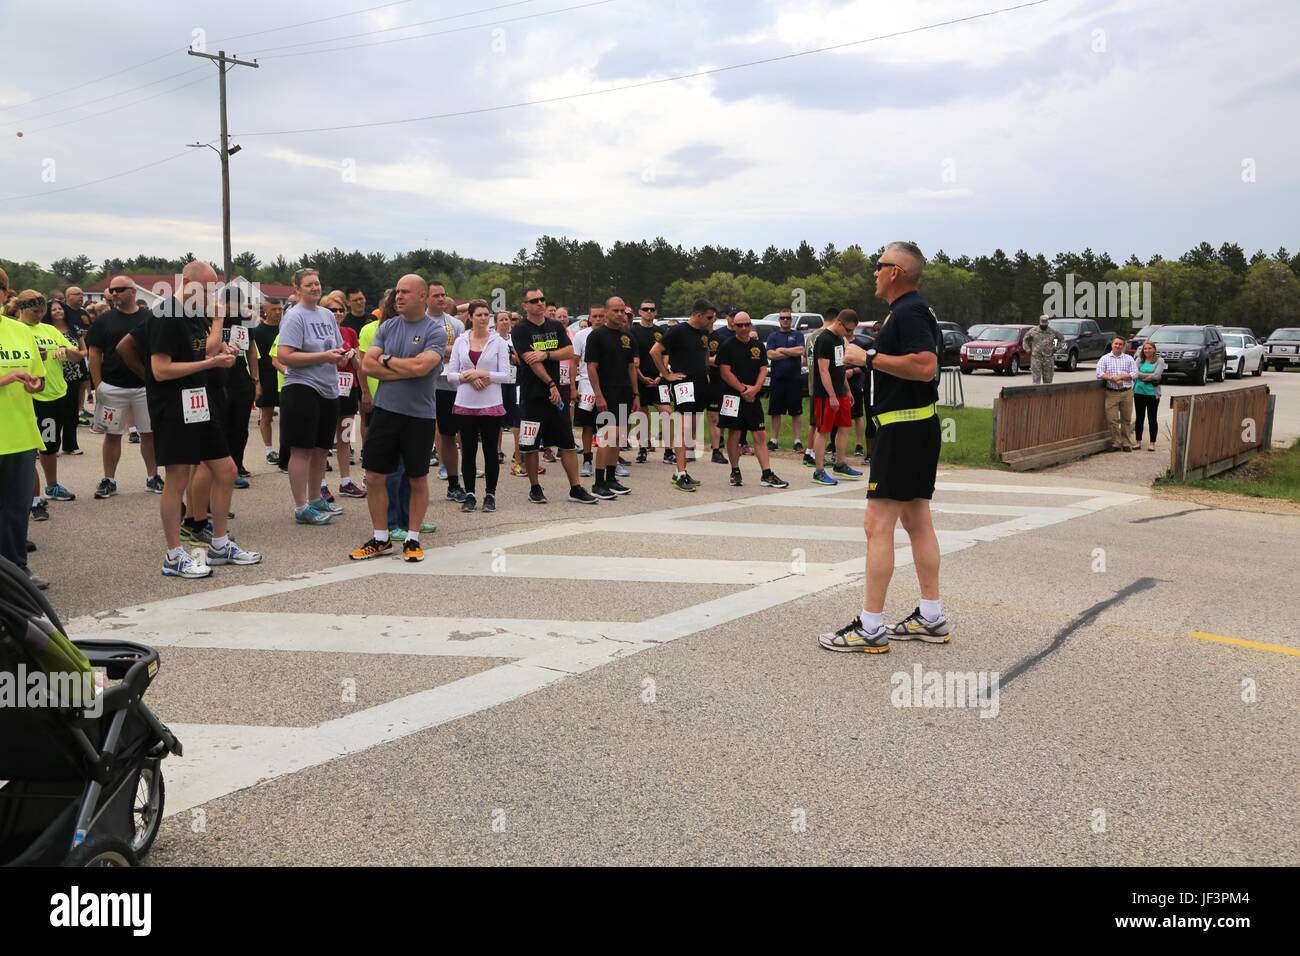 Garrison Commander Col. David J. Pinter Sr. provides opening remarks to runners from the installation community prior to a 5k run/2-mile walk at Rumpel Fitness Center on May 17, 2017, as part of the 2017 Fort McCoy Wellness Fair. Attendees to the fair not only participated in the run/walk, they also visited dozens of information displays featuring products and services from local businesses and post agencies. The American Red Cross also held a blood drive, and many door prizes were given to fair attendees. The fair, organized by the Directorate of Family and Morale, Welfare and Recreation, bro Stock Photo